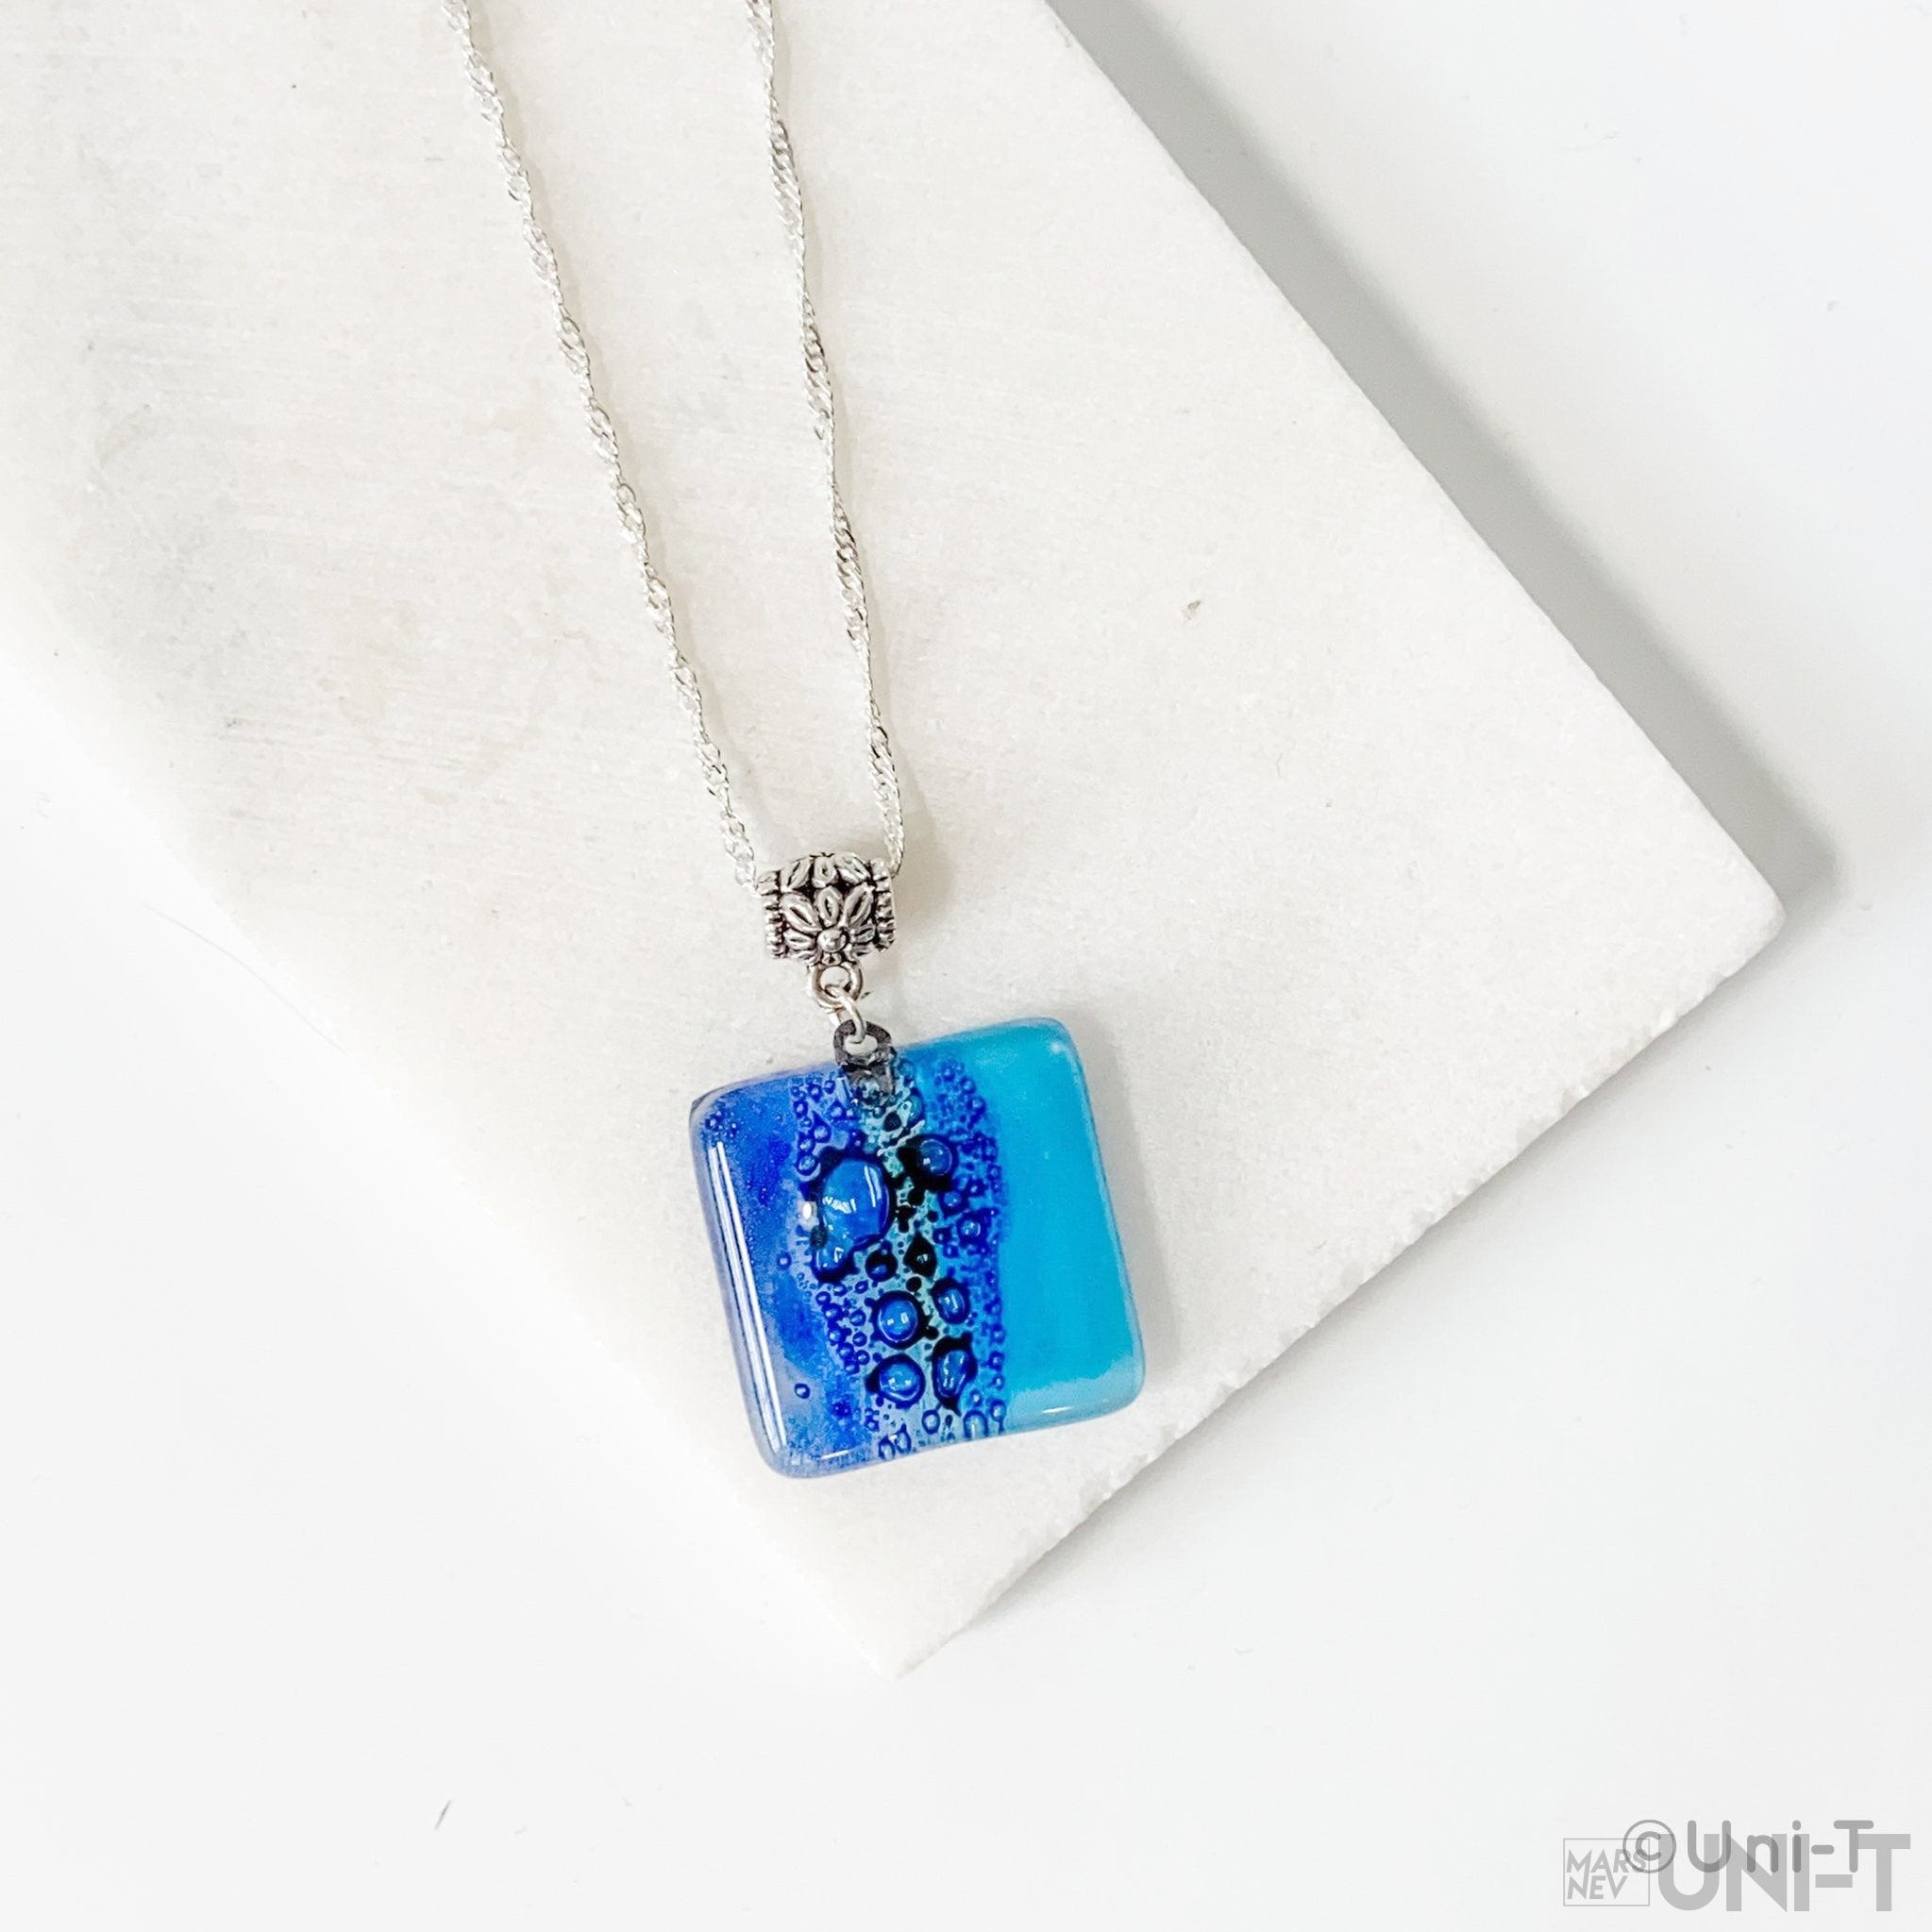 Recycled Fused Glass Necklaces - Square Uni-T Necklace